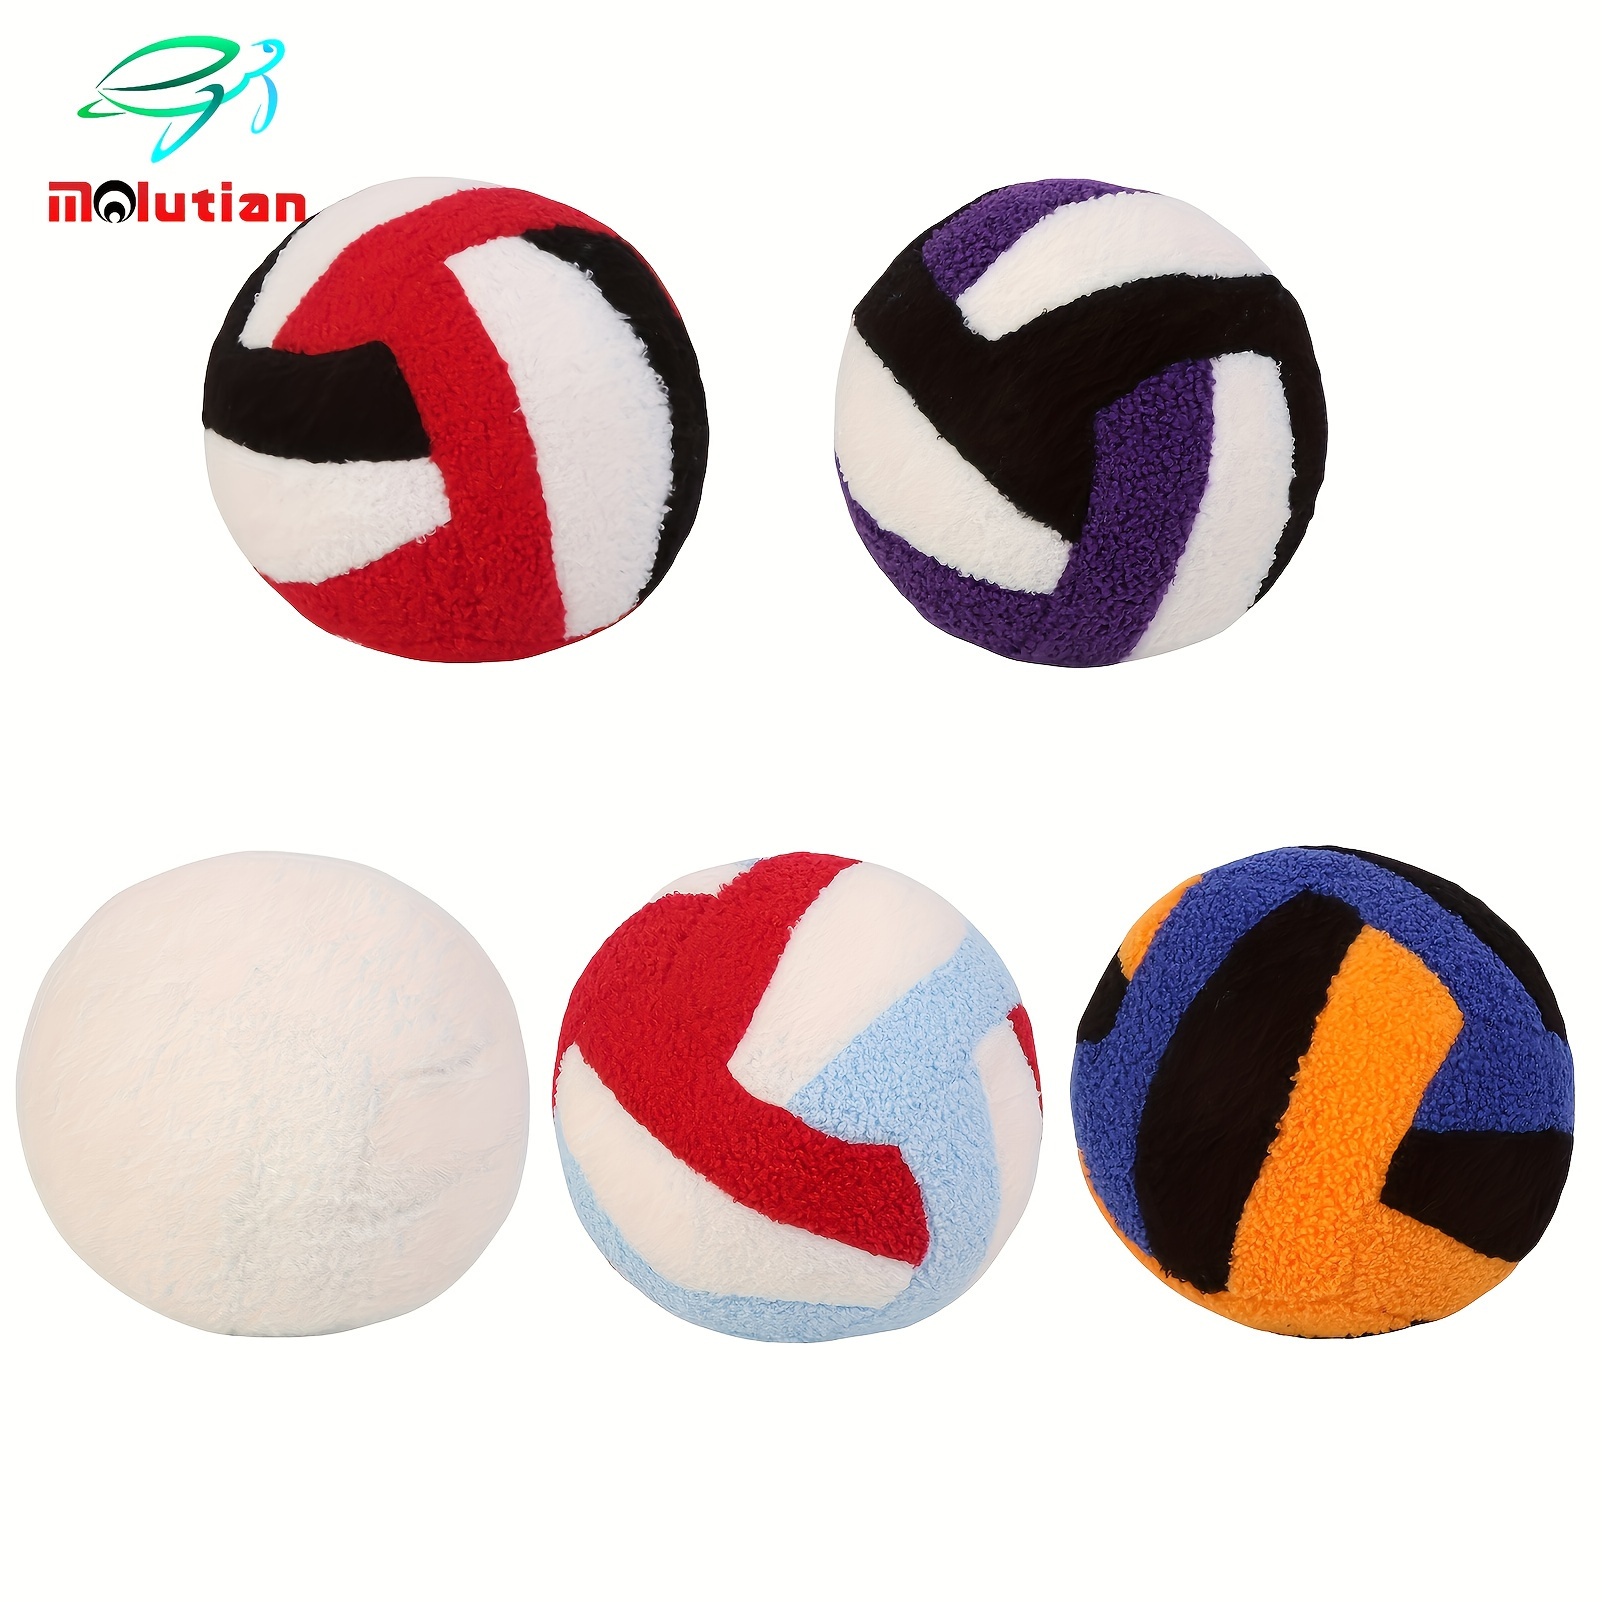 

5 Colors Choice 25cm/9.84in Volleyball Plush Toys, Fluffy Stuffed Volleyball Plush Pillow, Soft Plush Volleyball Pillow Volleyball Stuffed Toy Stuff Volleyball Gift For Kids Boy Girls